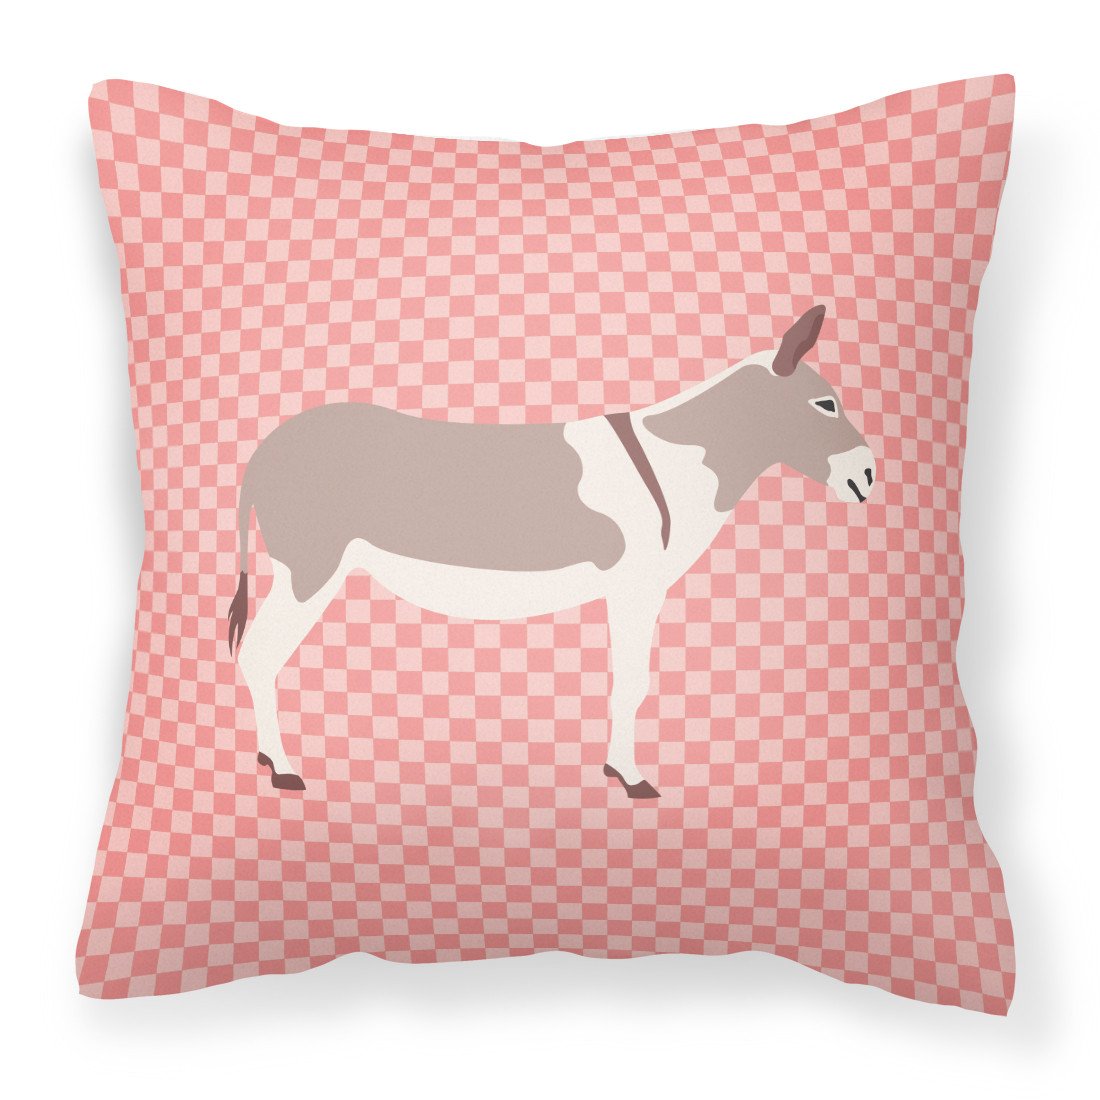 Australian Teamster Donkey Pink Check Fabric Decorative Pillow BB7846PW1818 by Caroline's Treasures